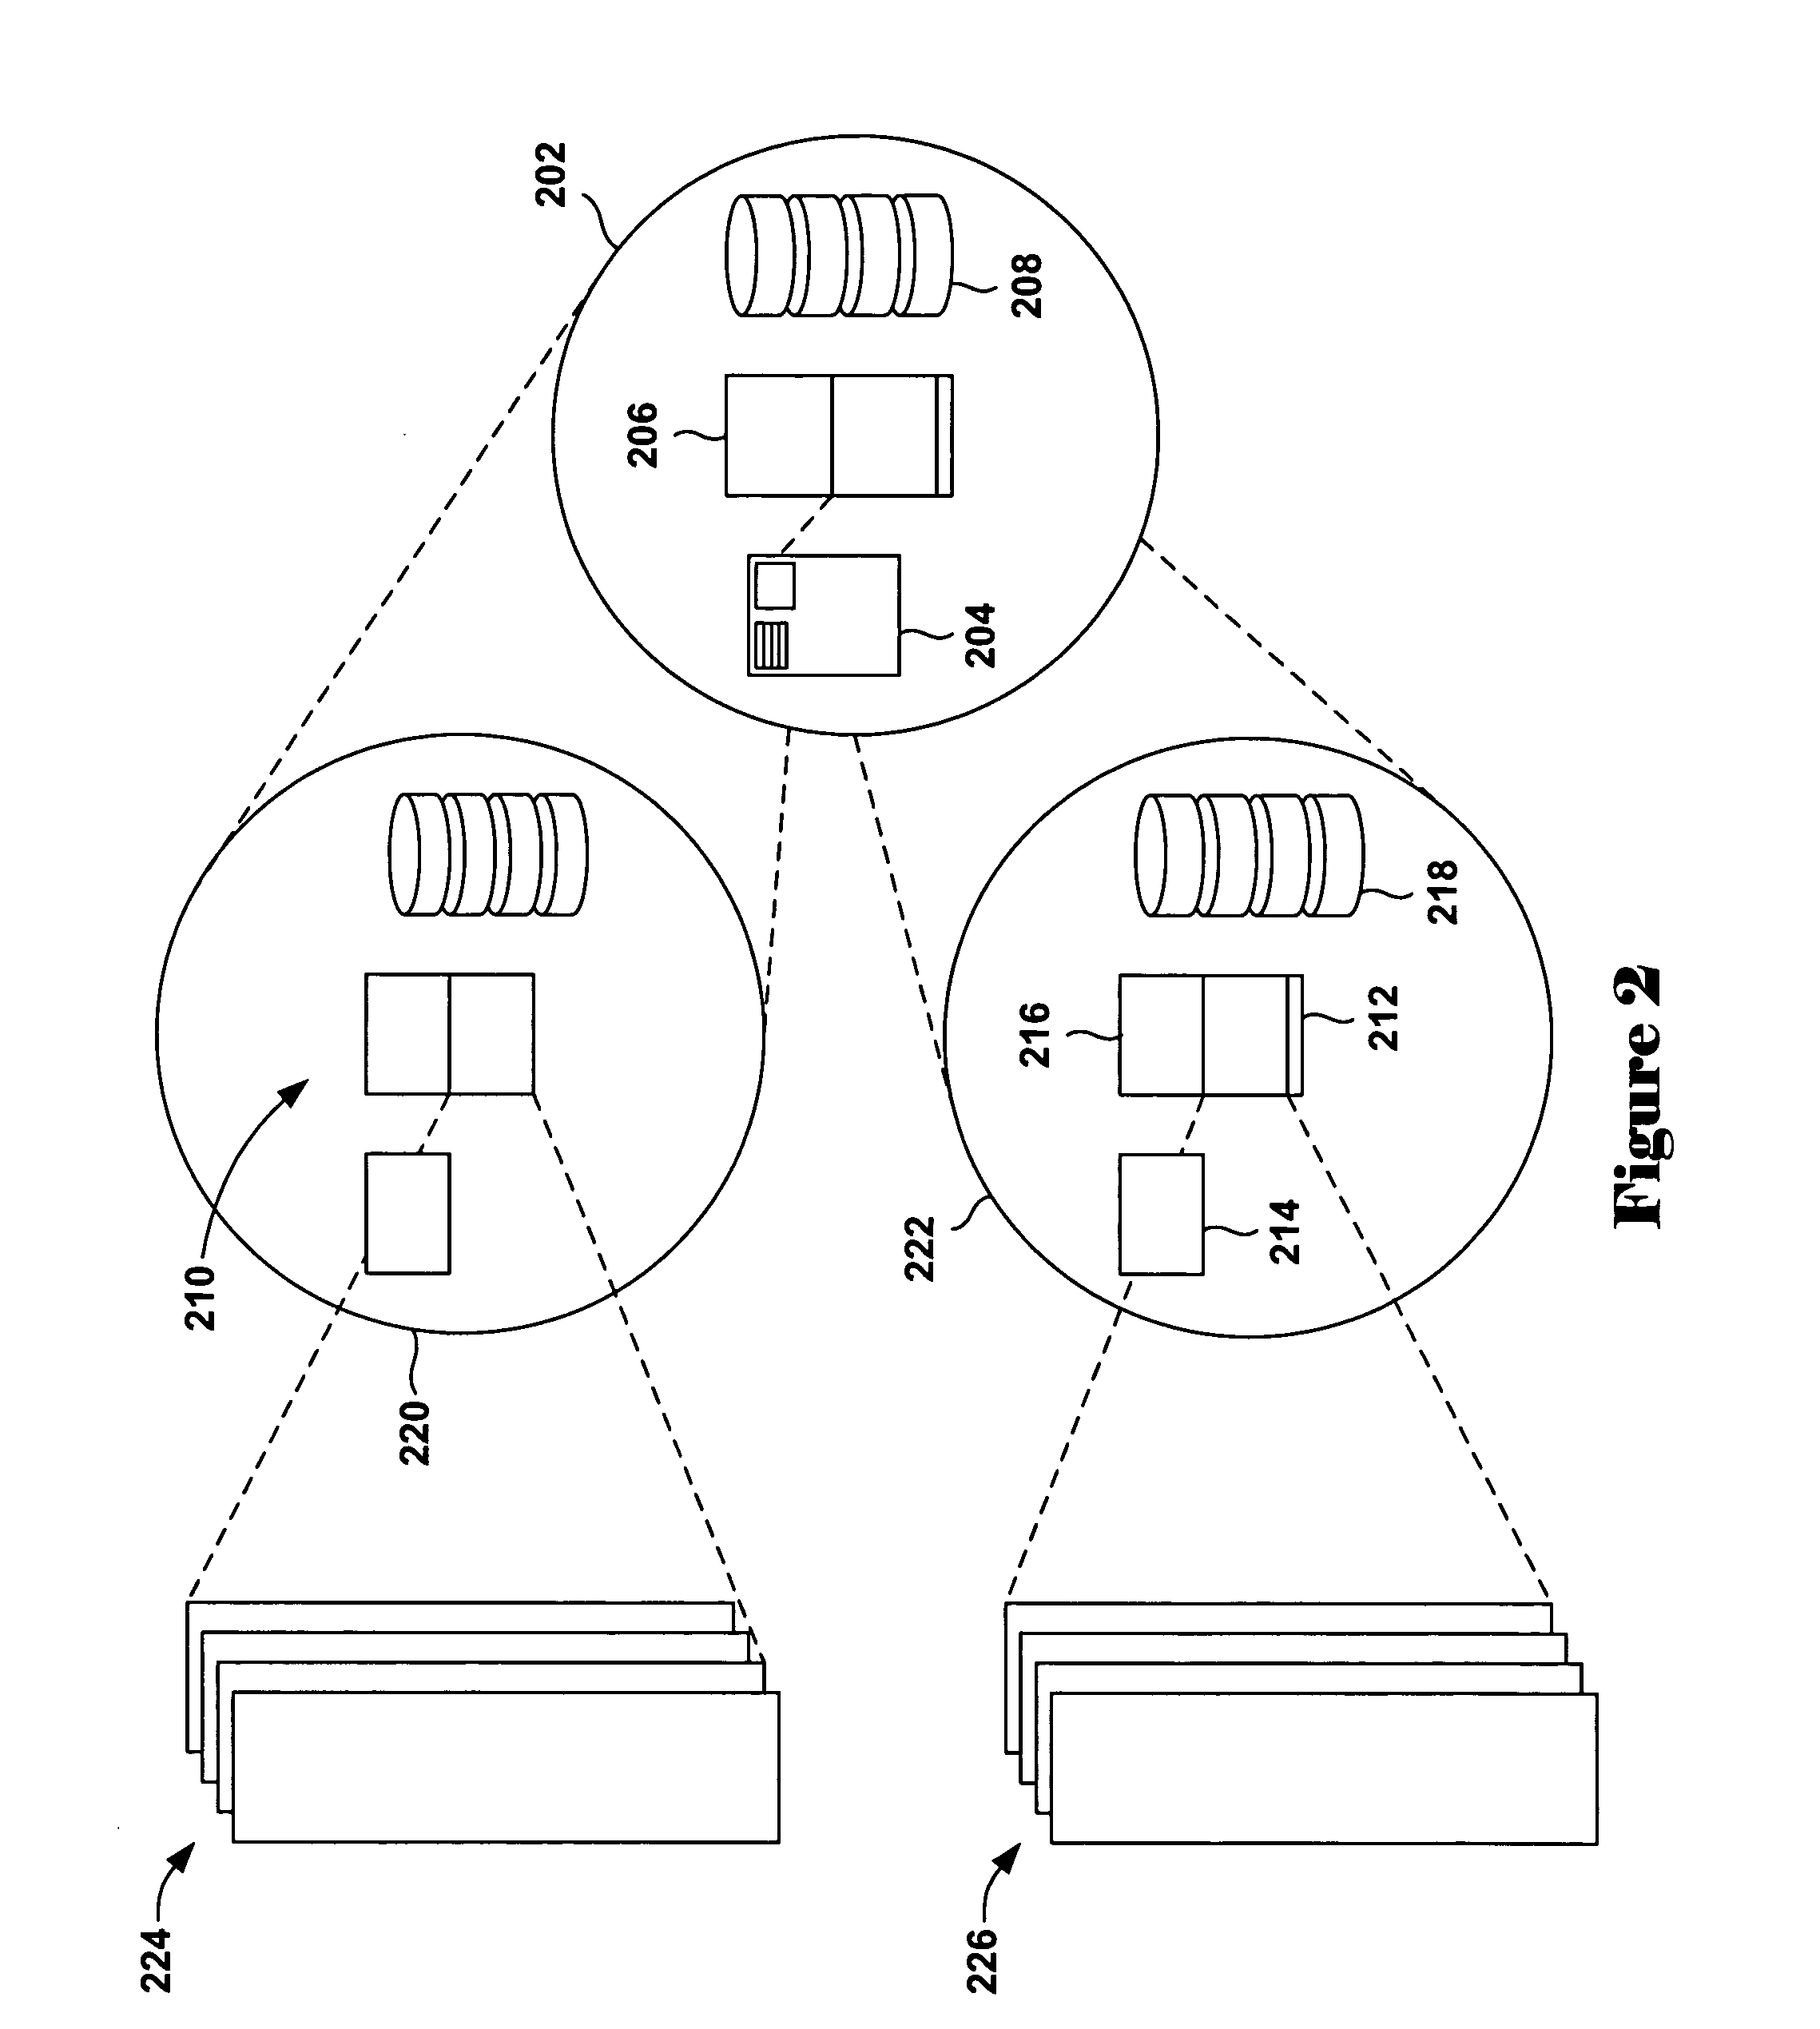 Method for patching virtually aliased pages by a virtual-machine monitor